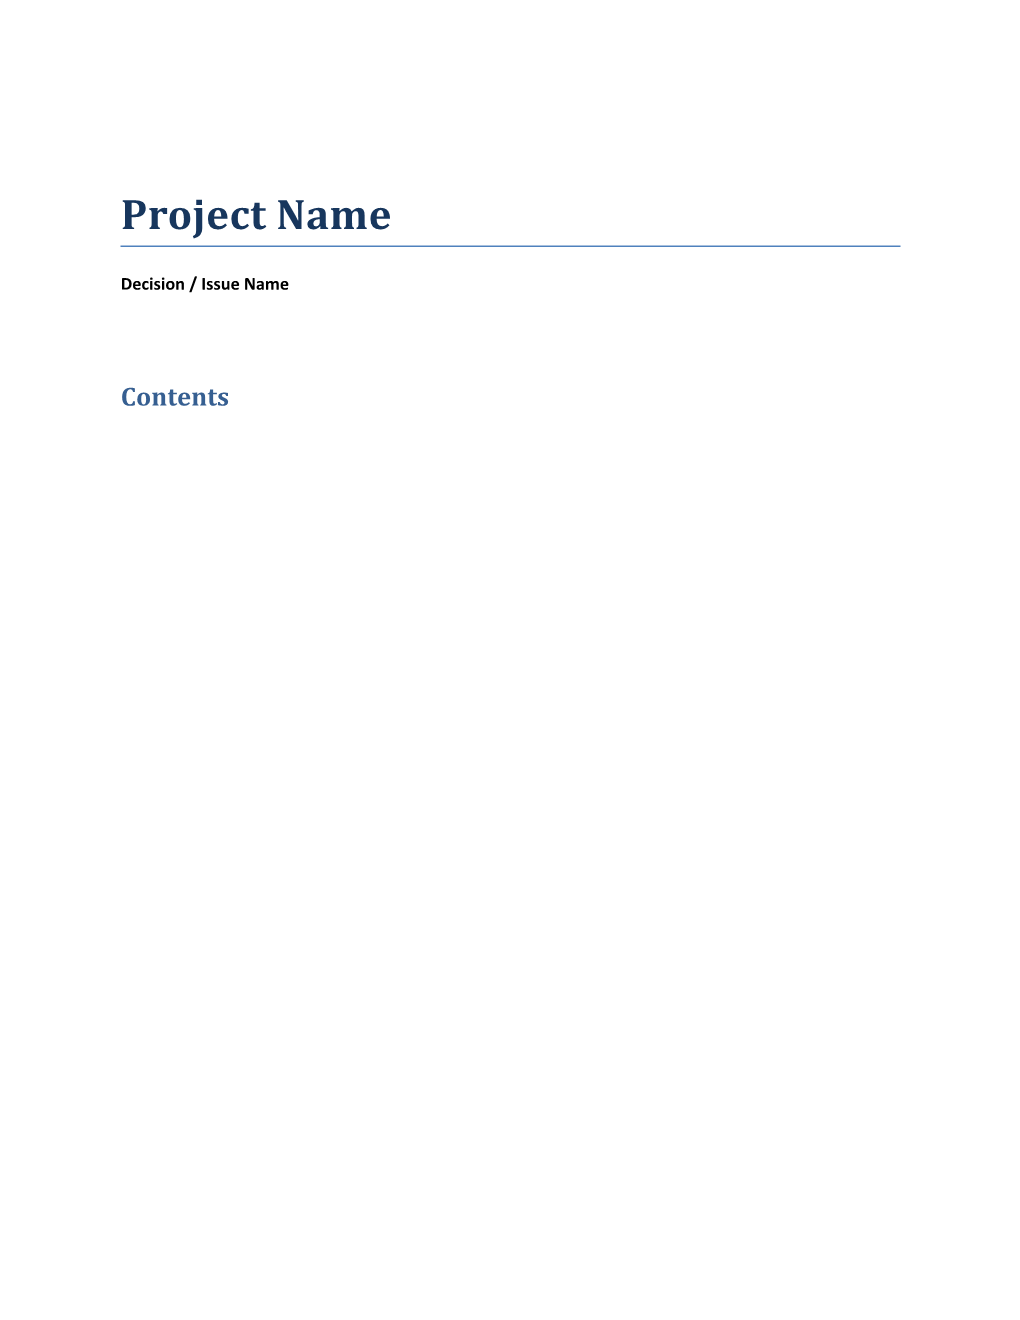 Decision Document Example and Template